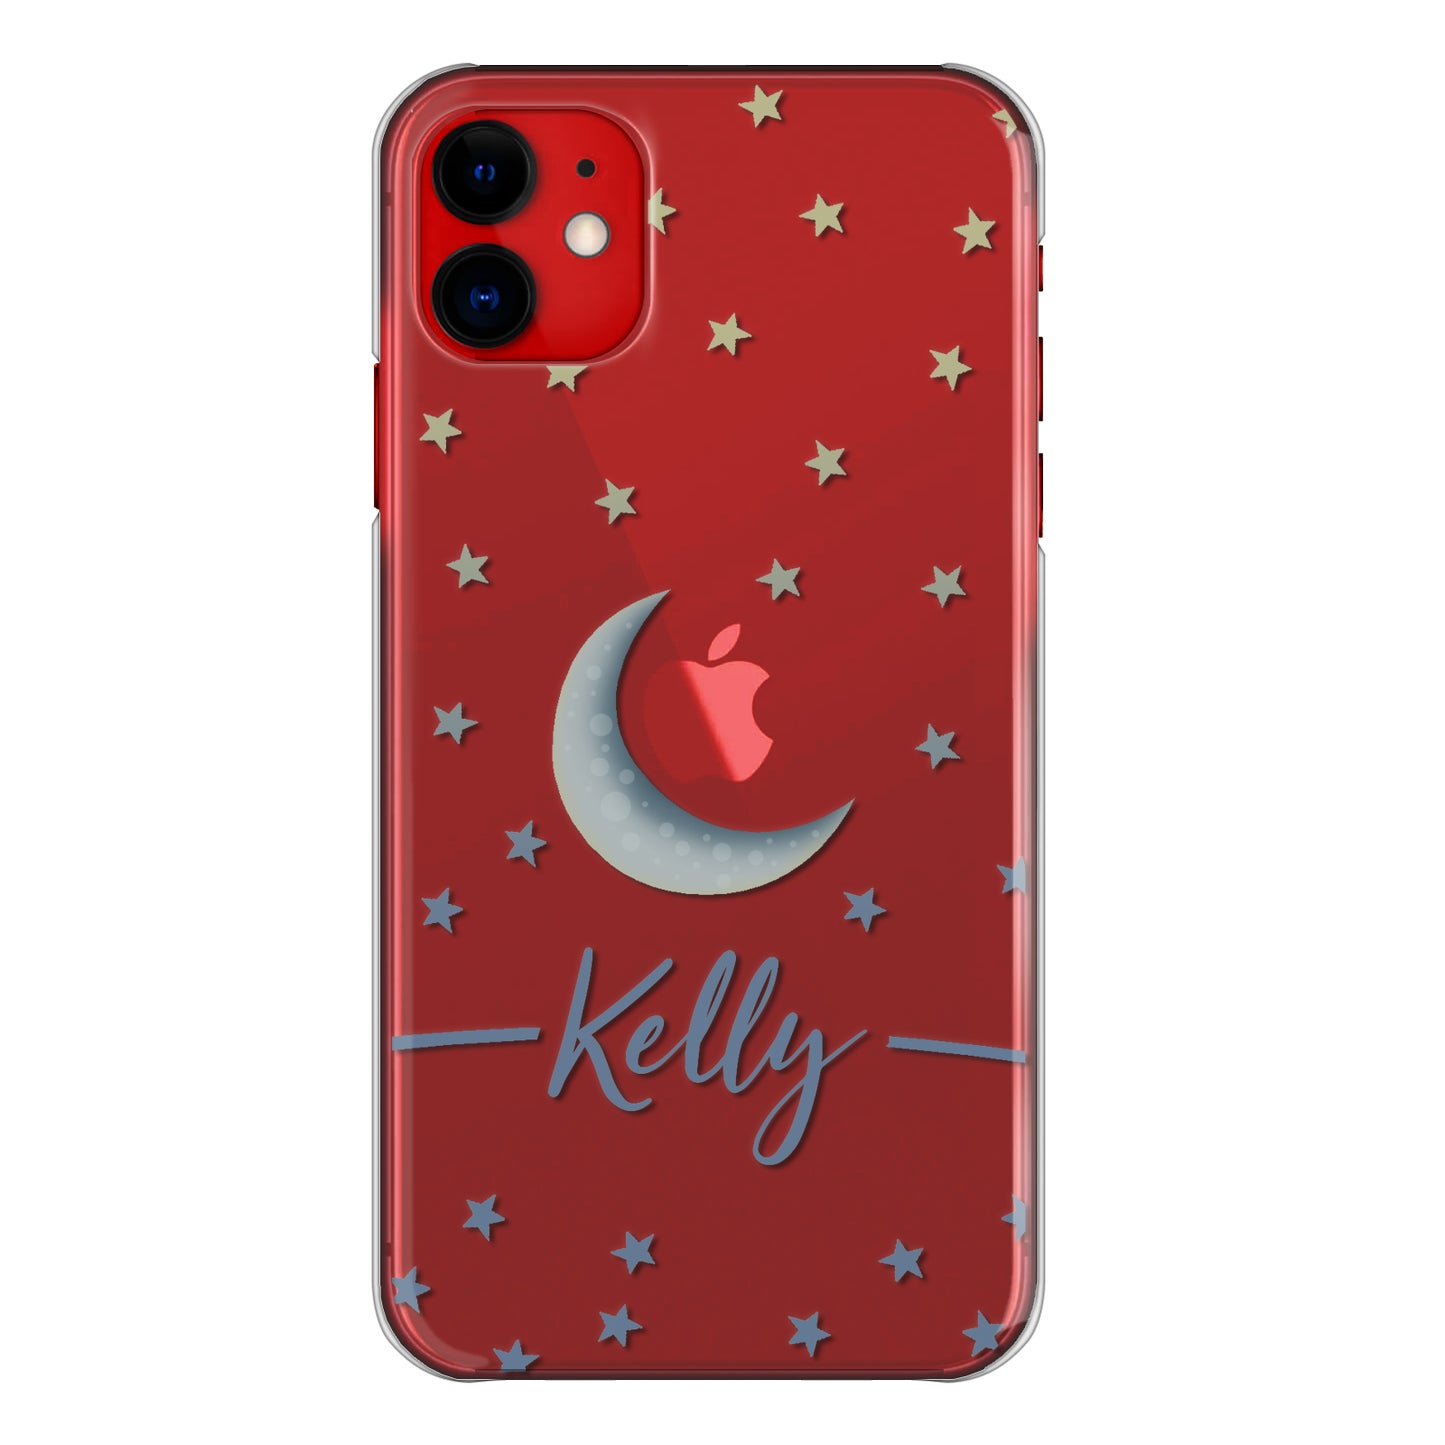 Personalised Nokia Phone Hard Case with Crescent Moon, Stars and Stylish Grey Text